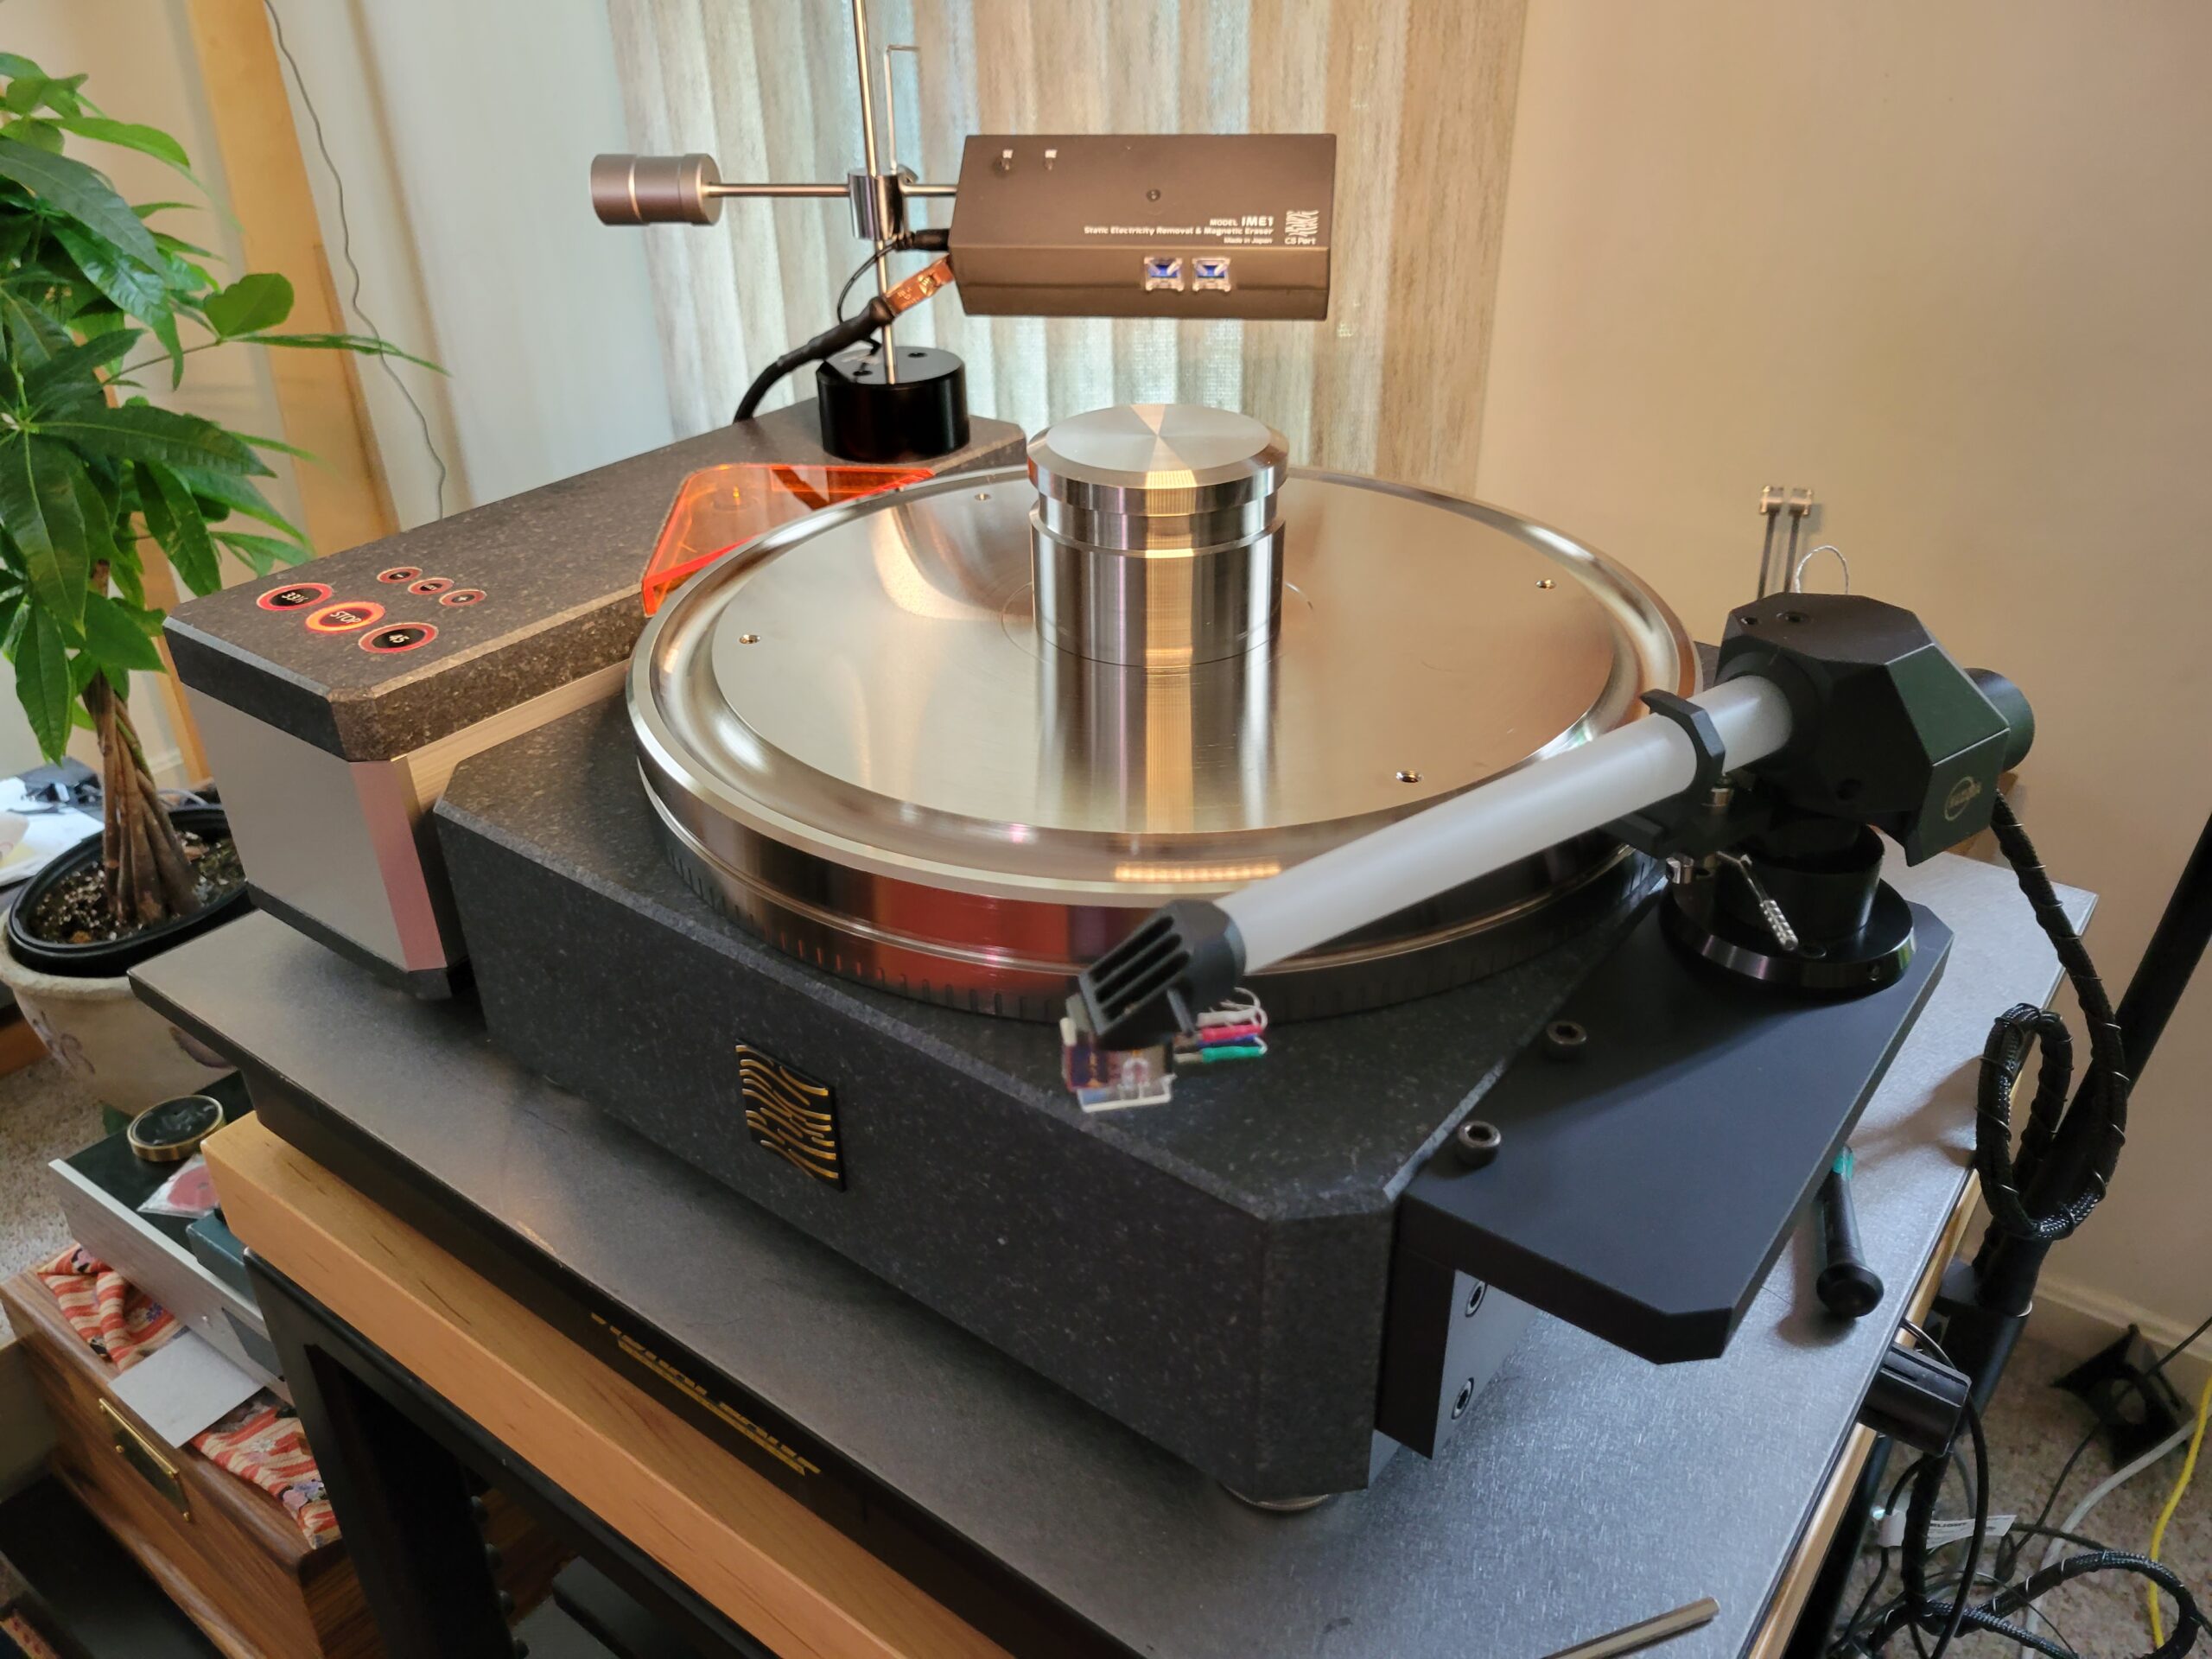 From the Land Of The Rising Sun. The CS Port TAT1M2 Air Float turntable arrived today, all 238 pounds! With the help of a friend got everything set-up only thing left to do is set-up the cartridge then let the music play.